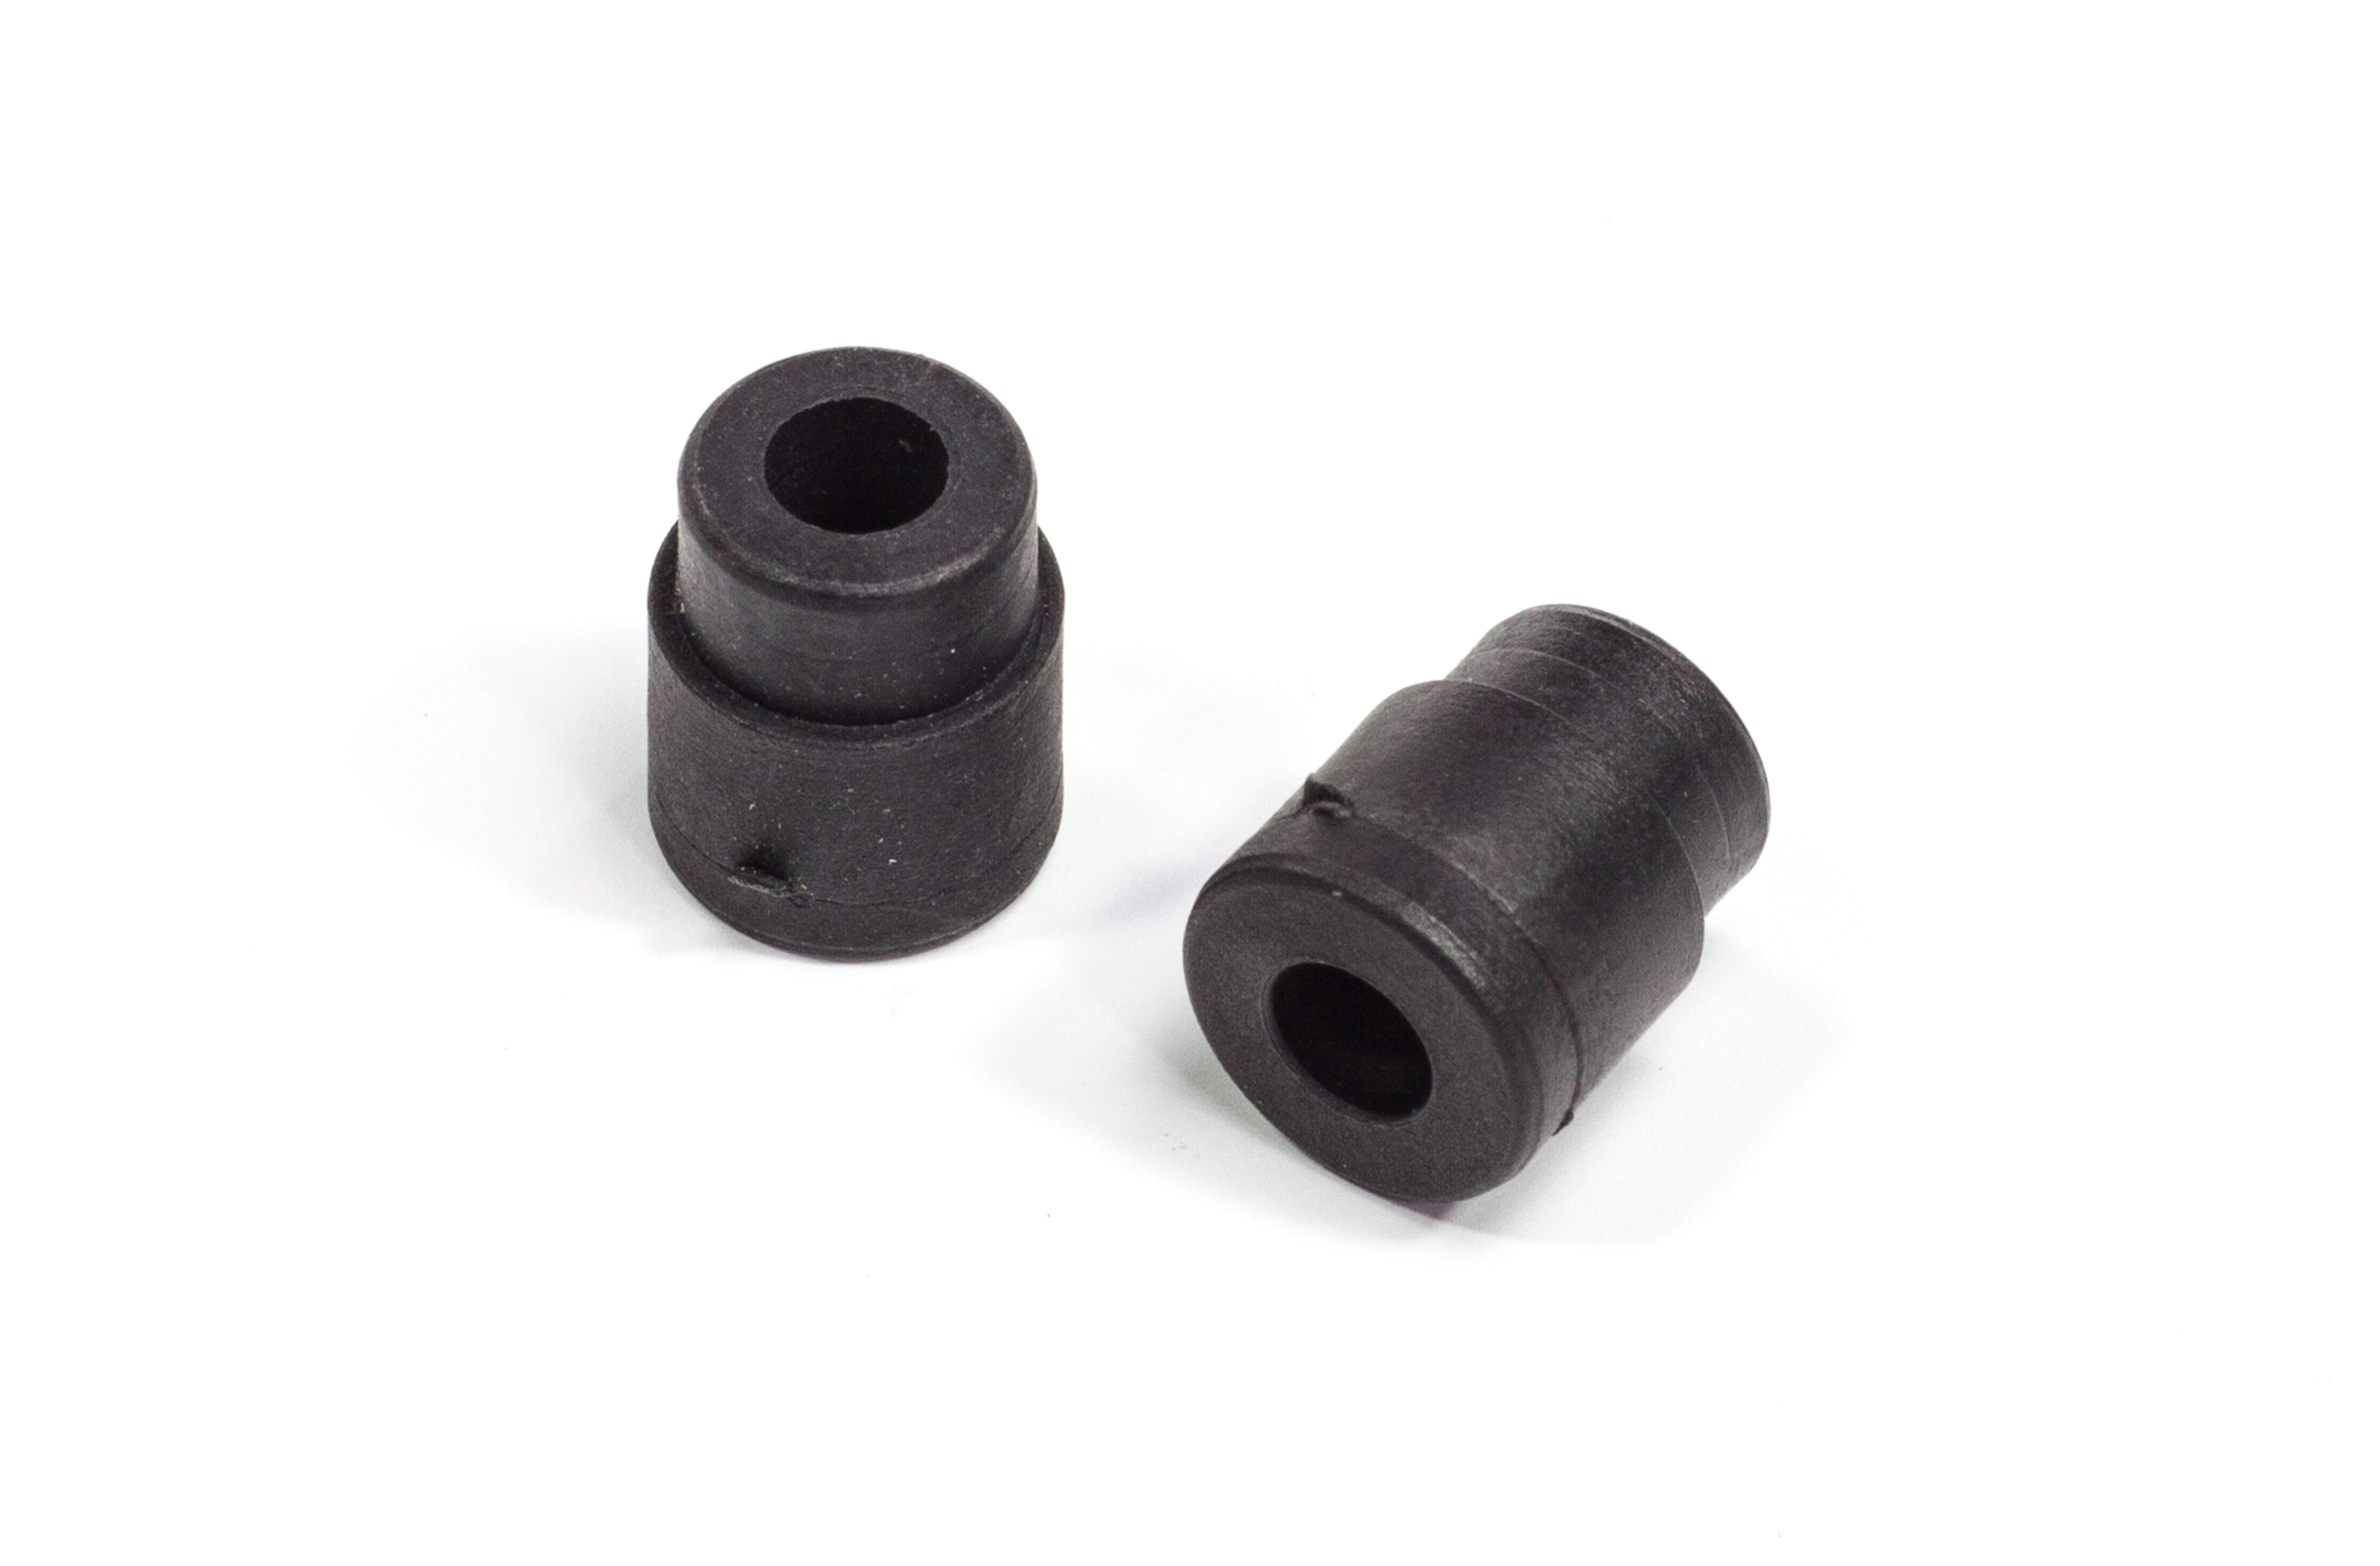 7070/02 FG Spacer bushing for rear shock stay